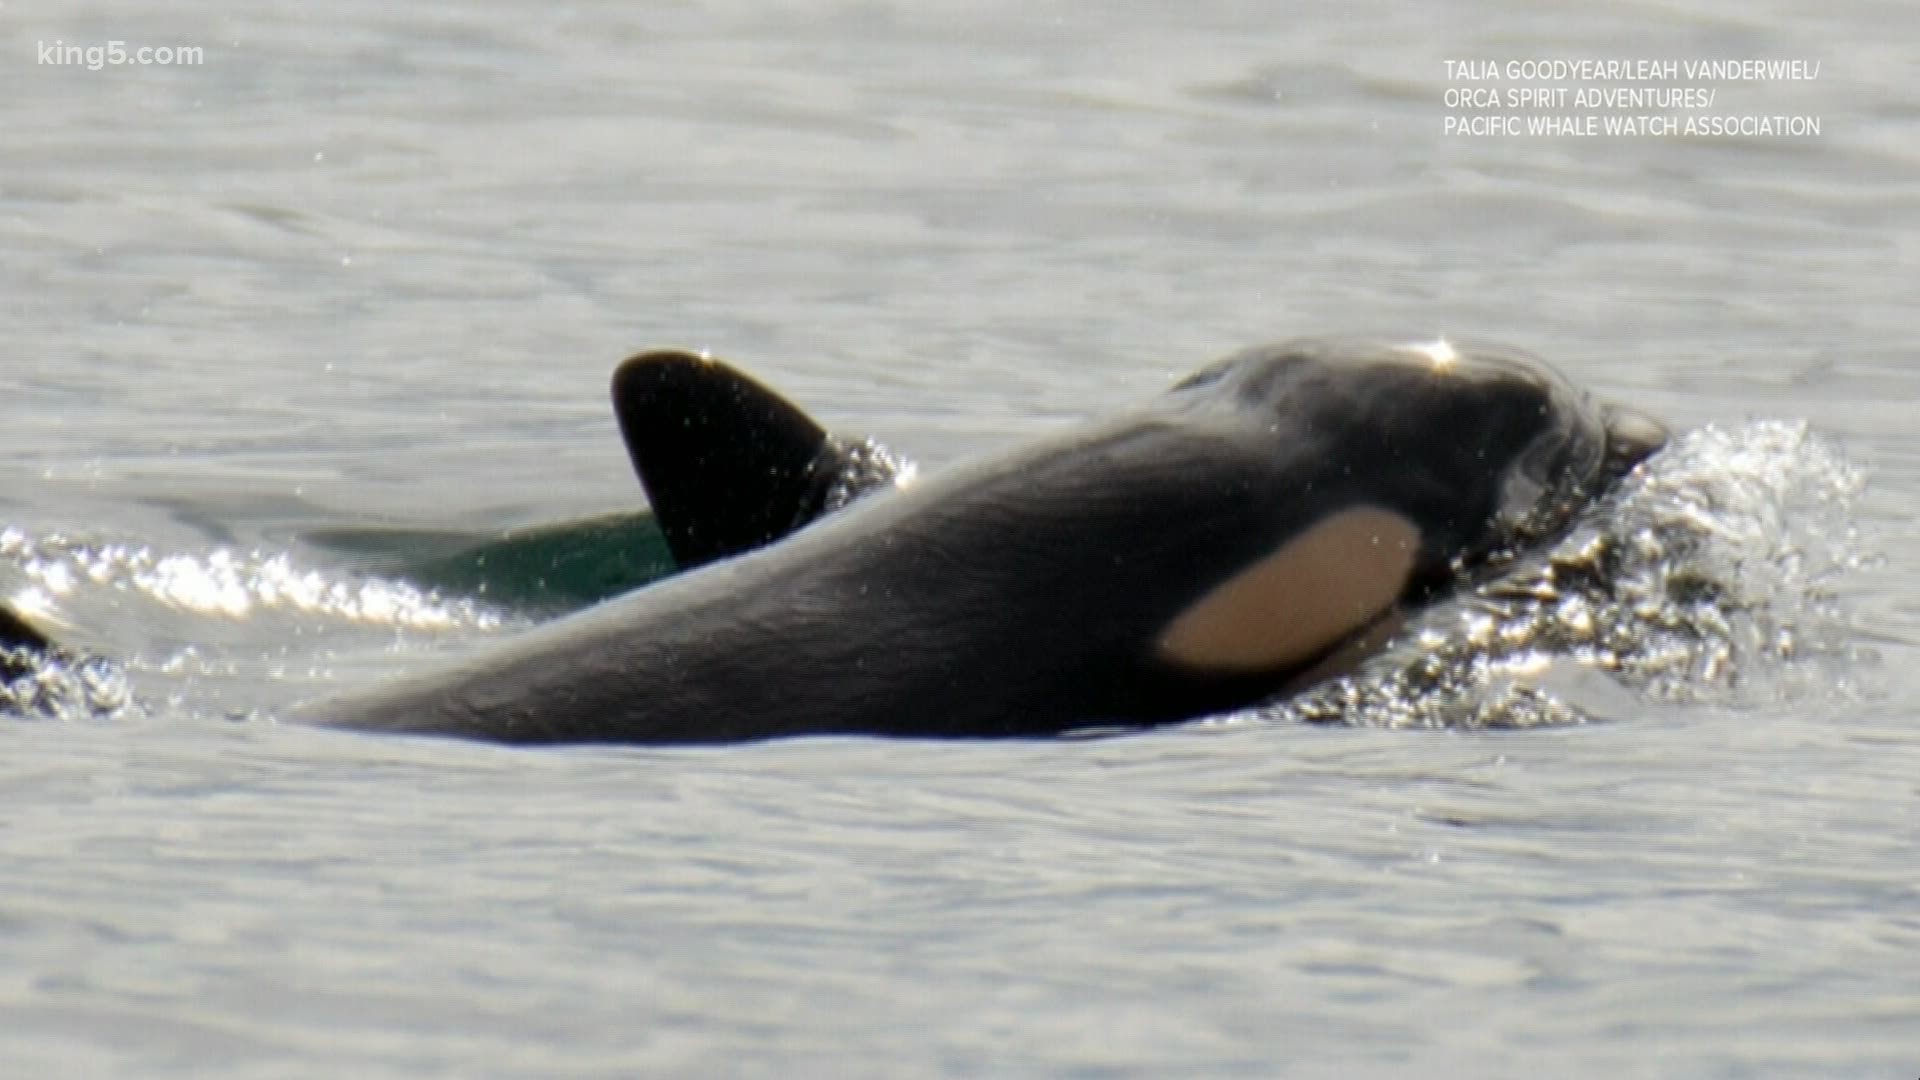 Southern Resident orca Eclipse, or J41, gave birth Thursday afternoon miles off the coast of Victoria, B.C.